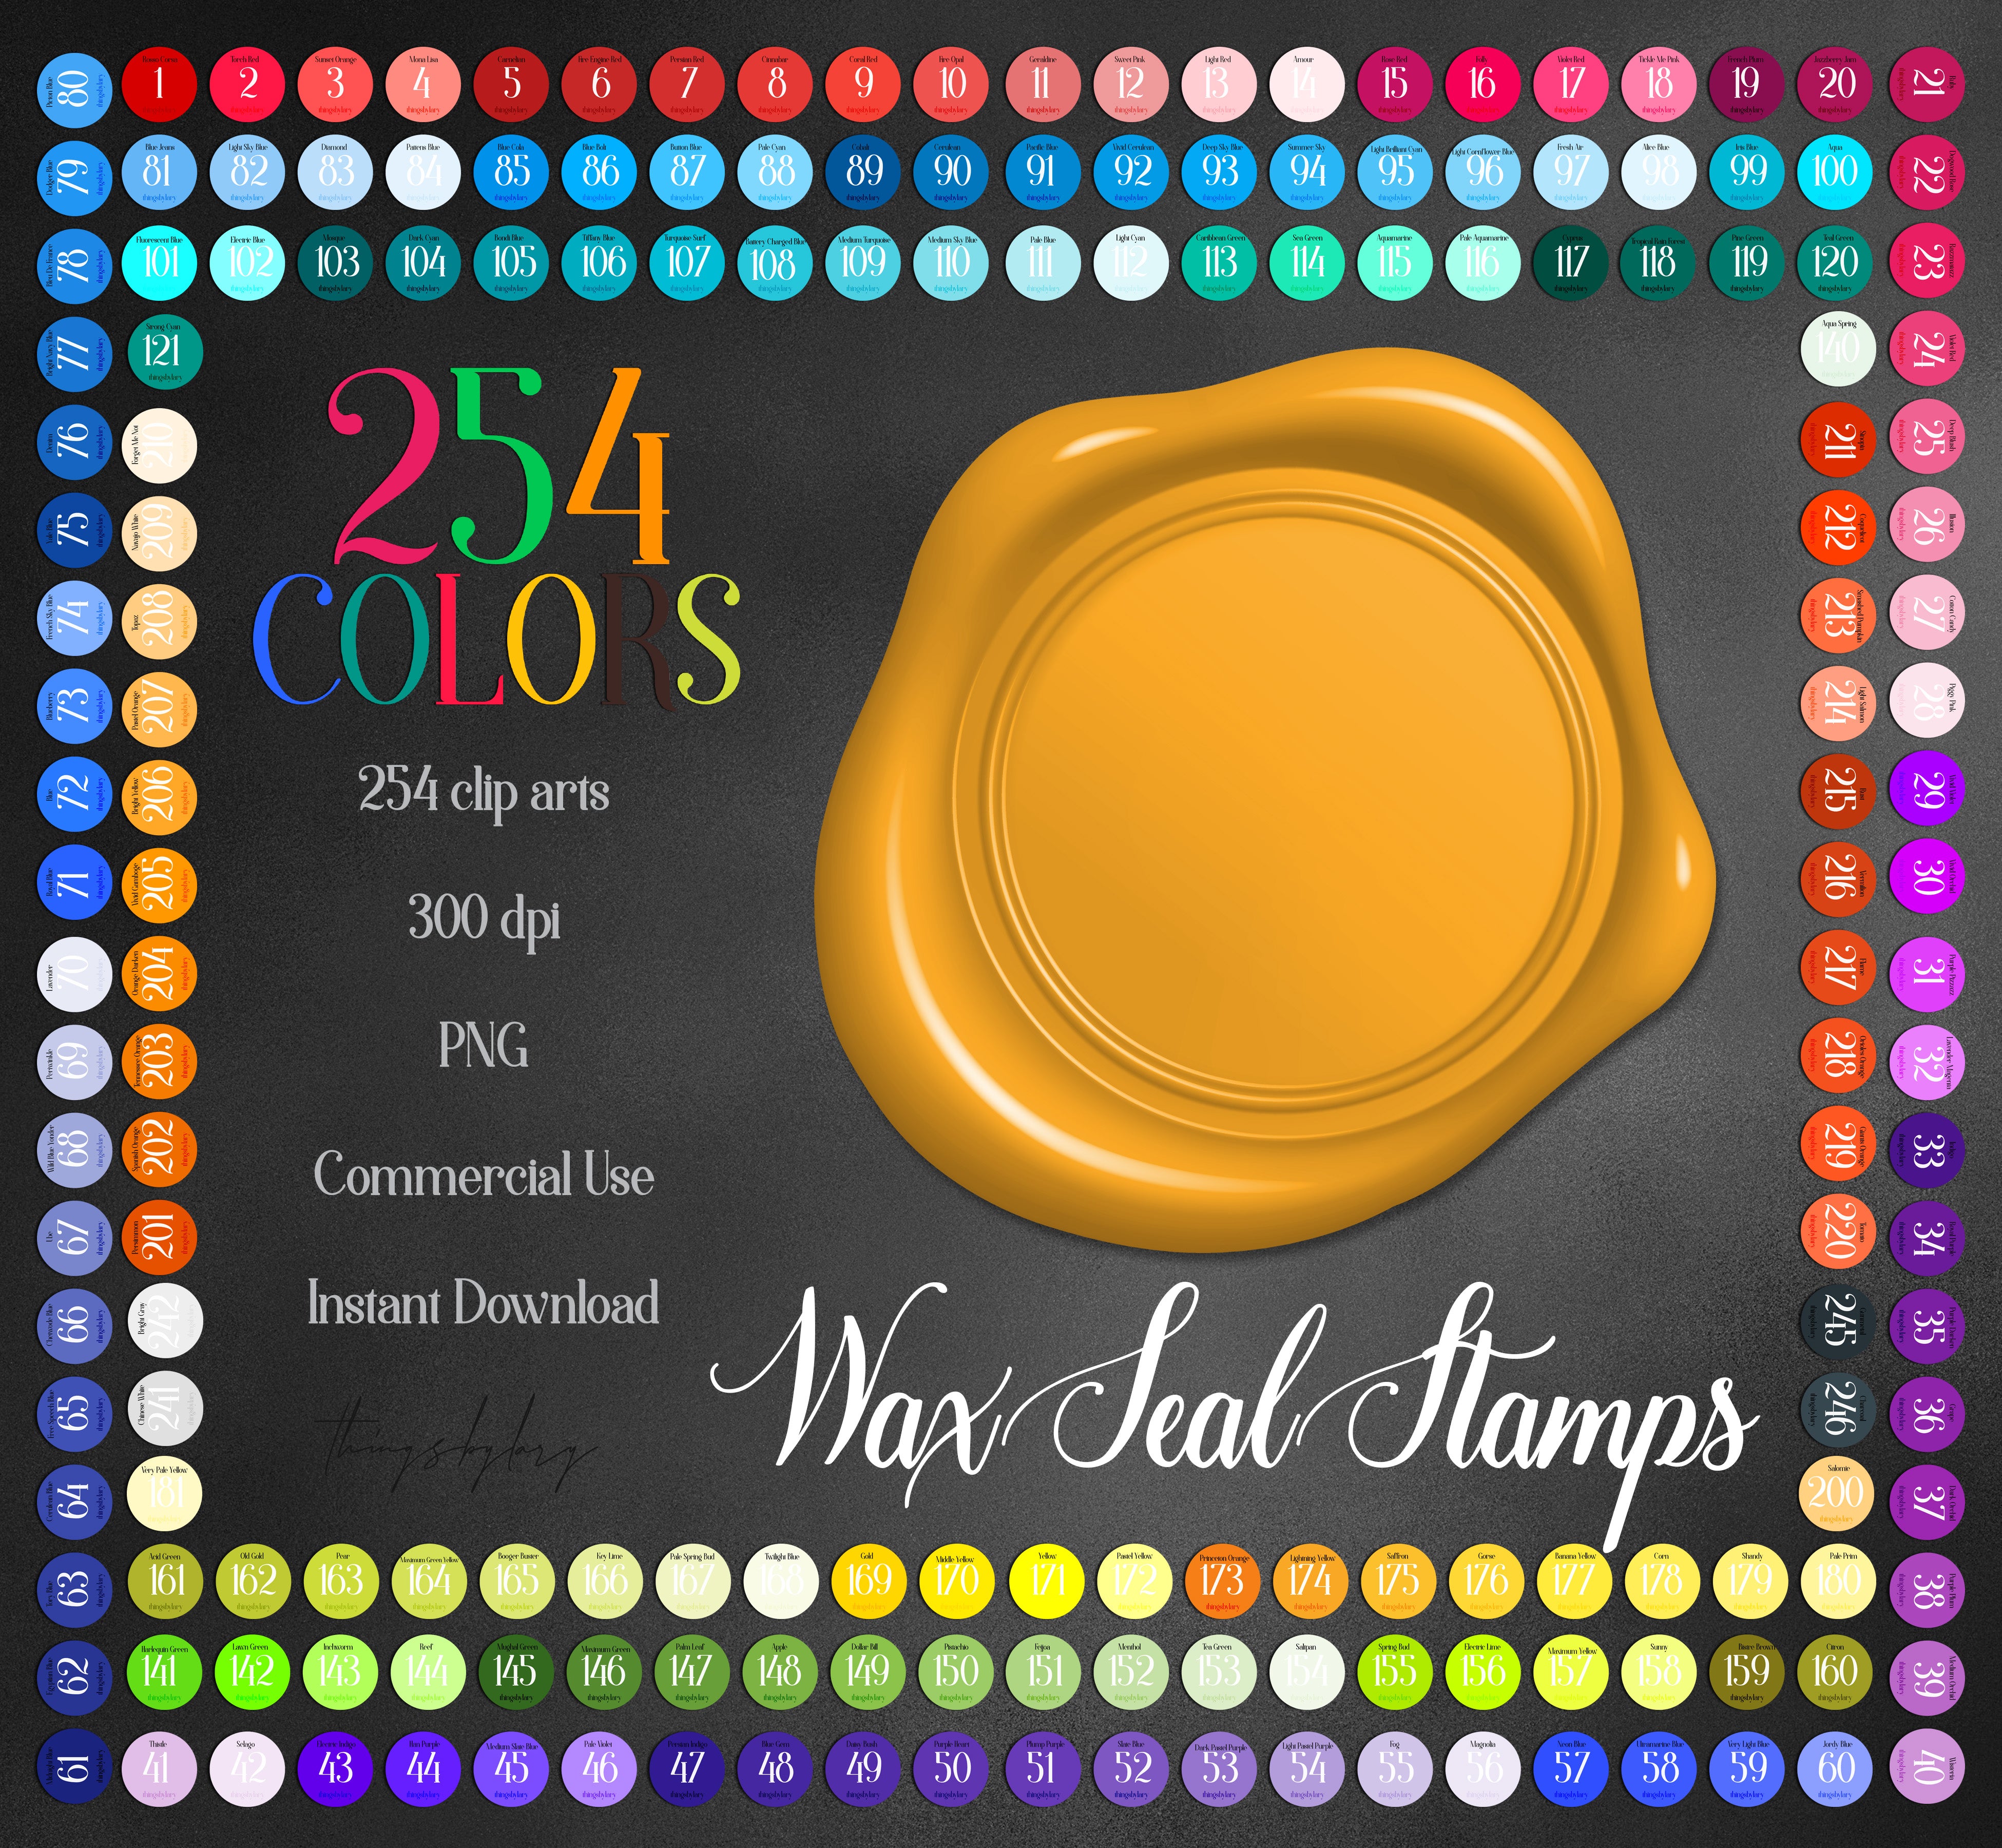 254 Wax Seal Stamps PNG Images